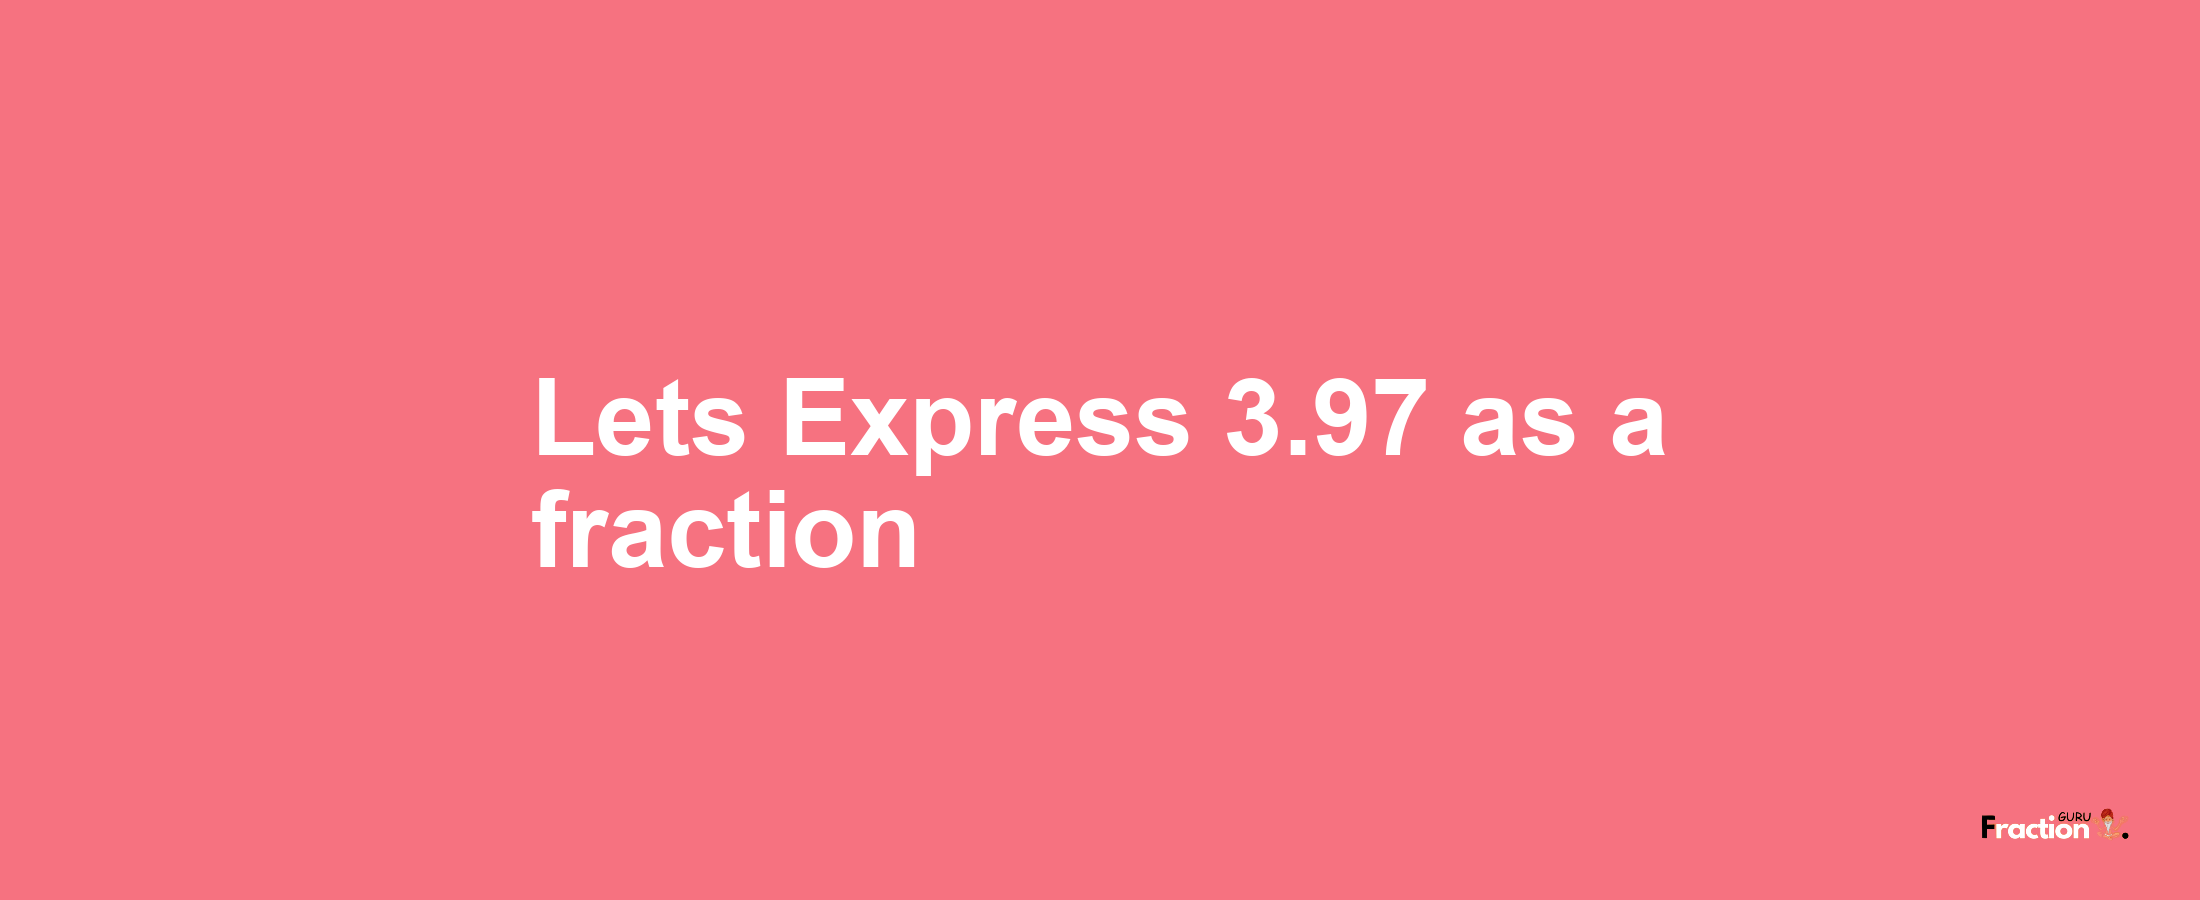 Lets Express 3.97 as afraction